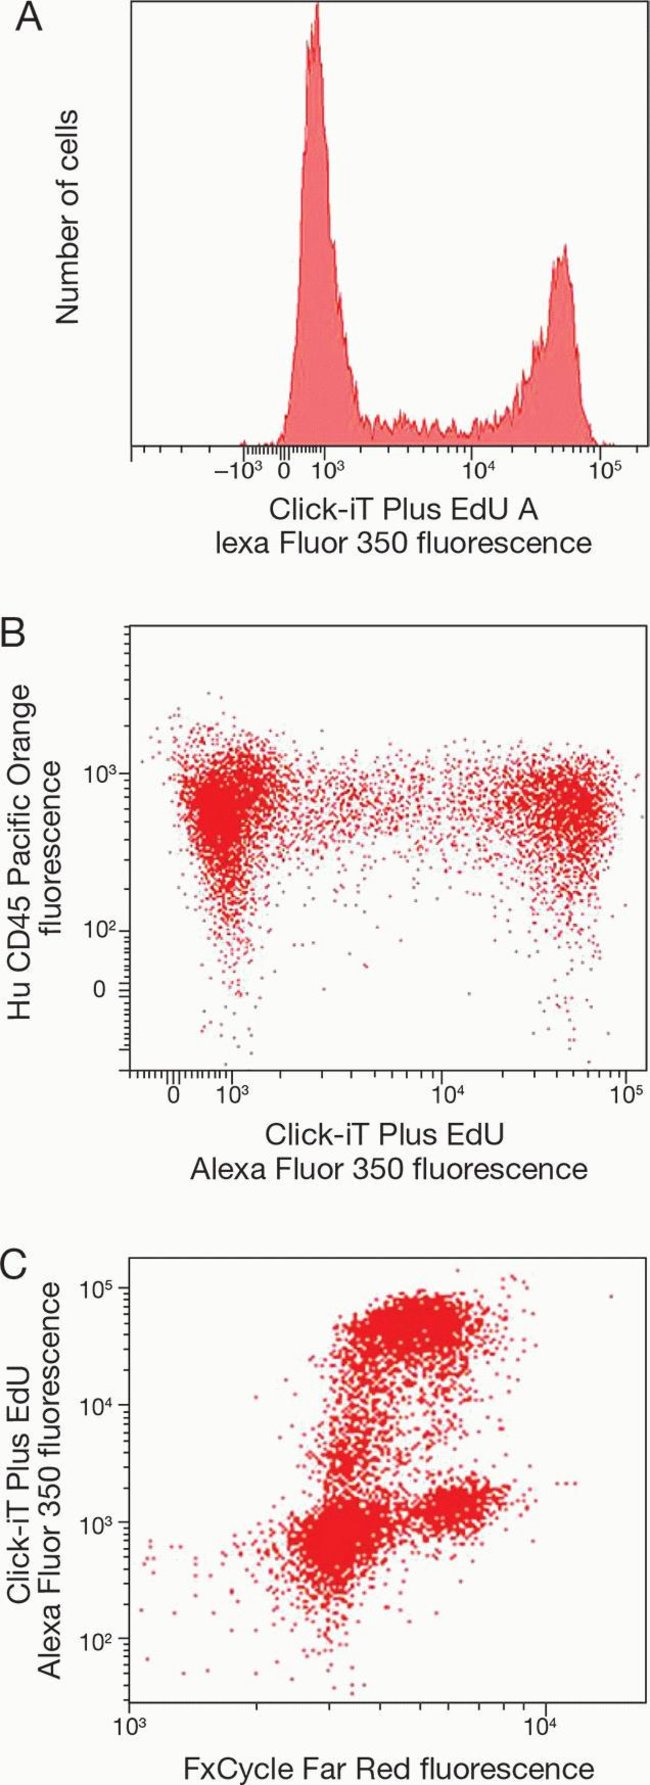 Fluorescence signal and dual parameter plots from Alexa Fluor 350 Click-iT Plus EdU Flow Cytometry Assay Kit, CD45-Pacific Orange, and FxCycle Far Red